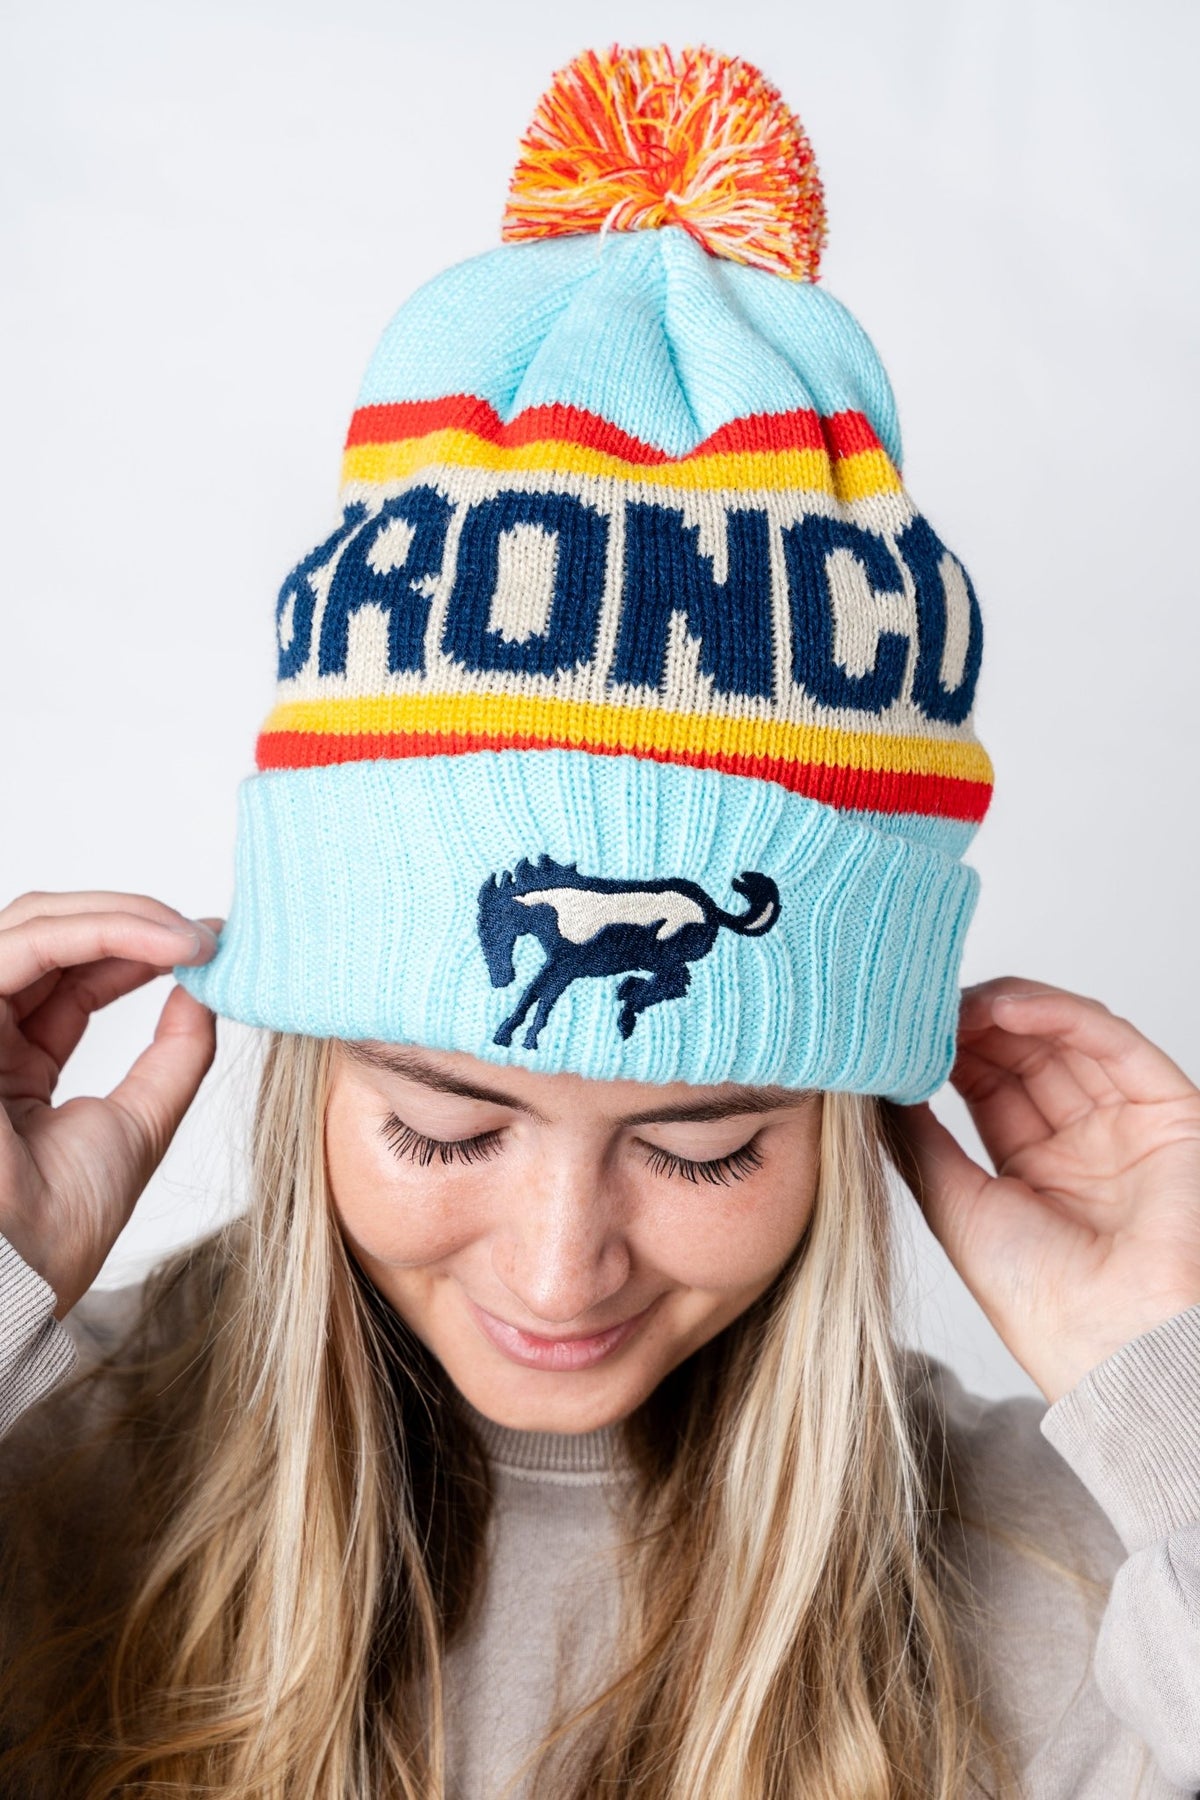 Bronco pillow pom beanie light blue - Trendy Gifts at Lush Fashion Lounge Boutique in Oklahoma City